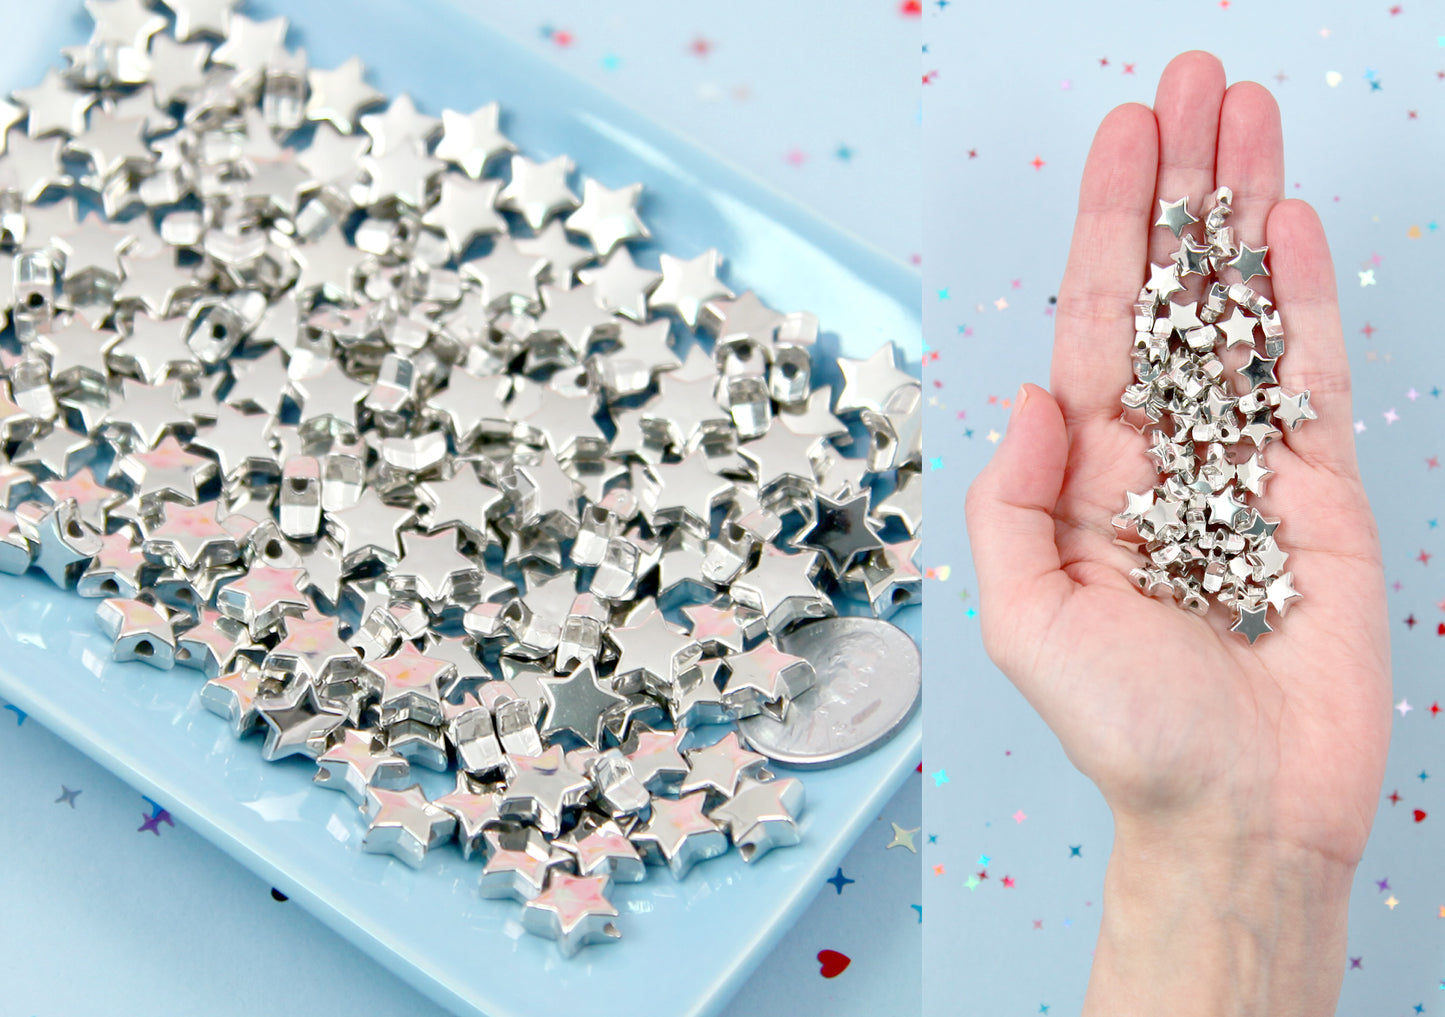 Silver Star Beads - 100 pcs - 10mm Small Star Bead - Electroplated Silver - Easily make any kind of jewelry